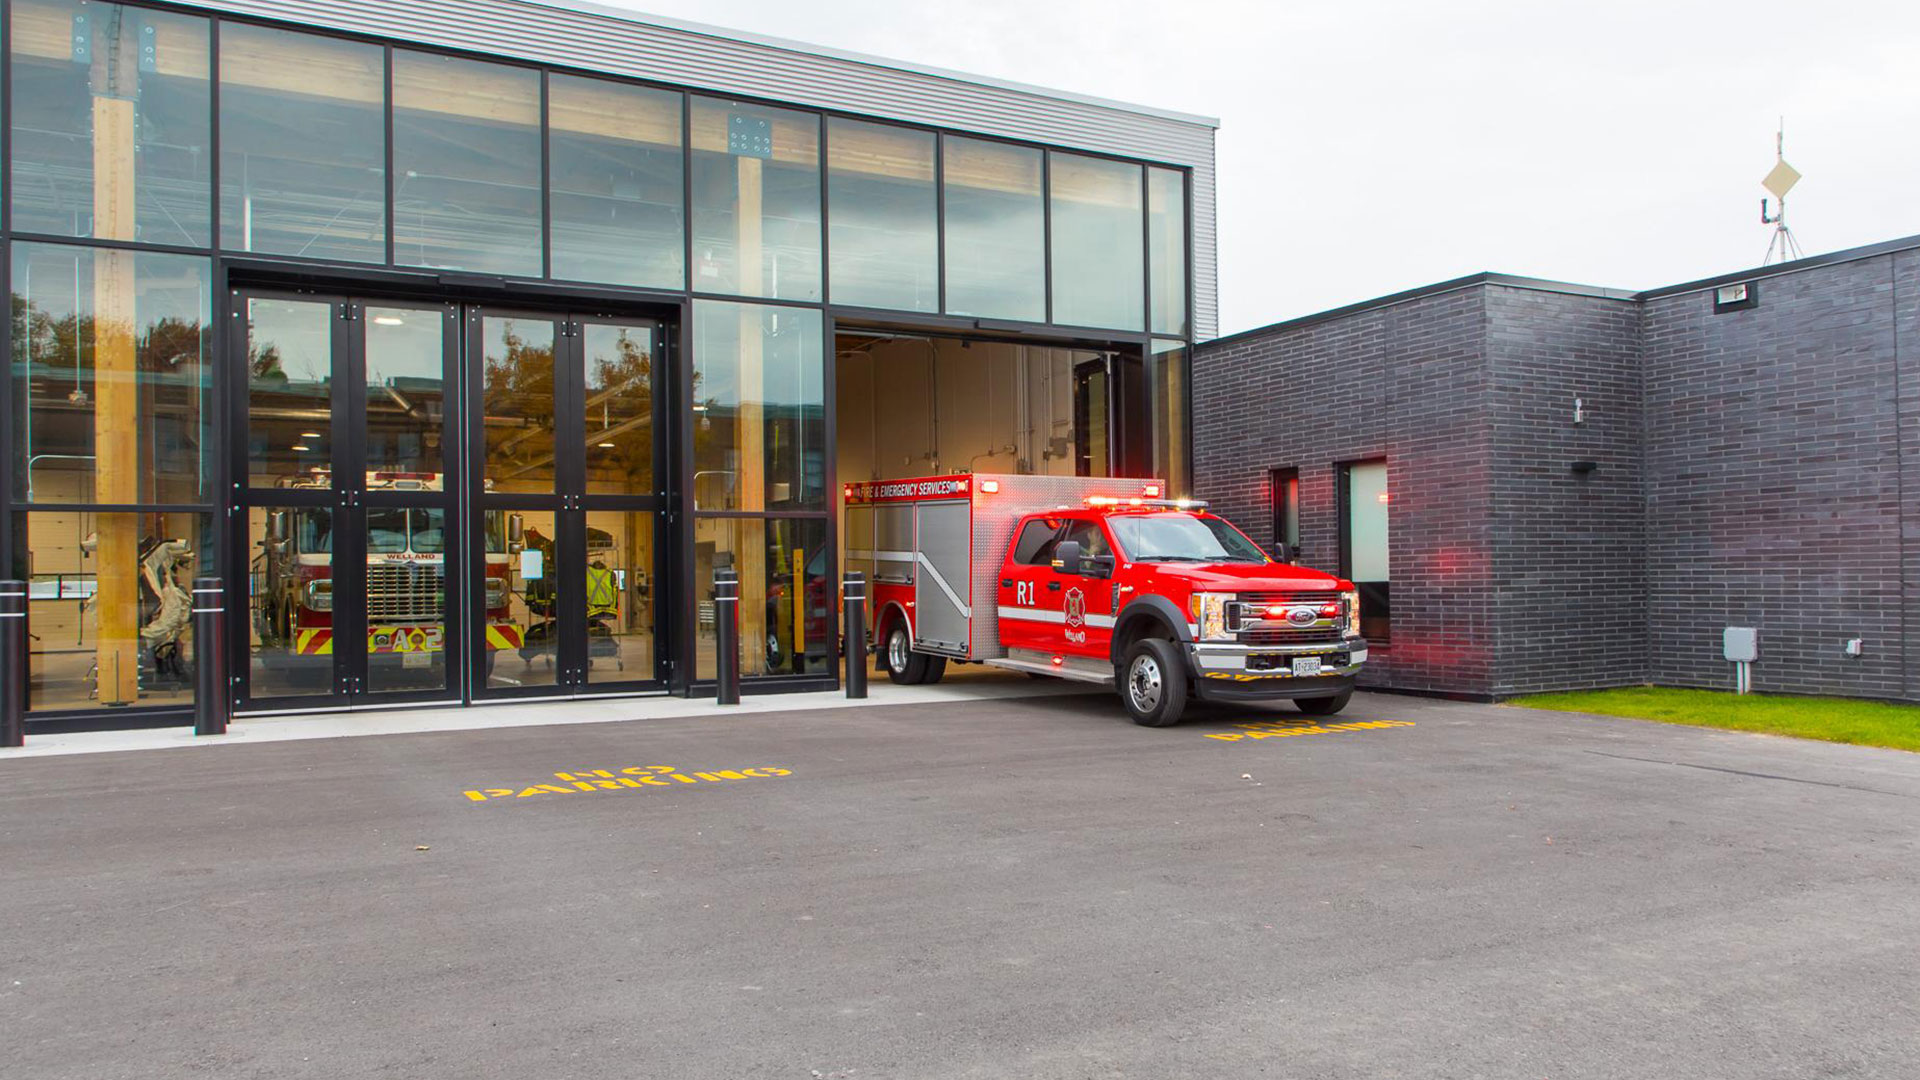 image of a new firehall